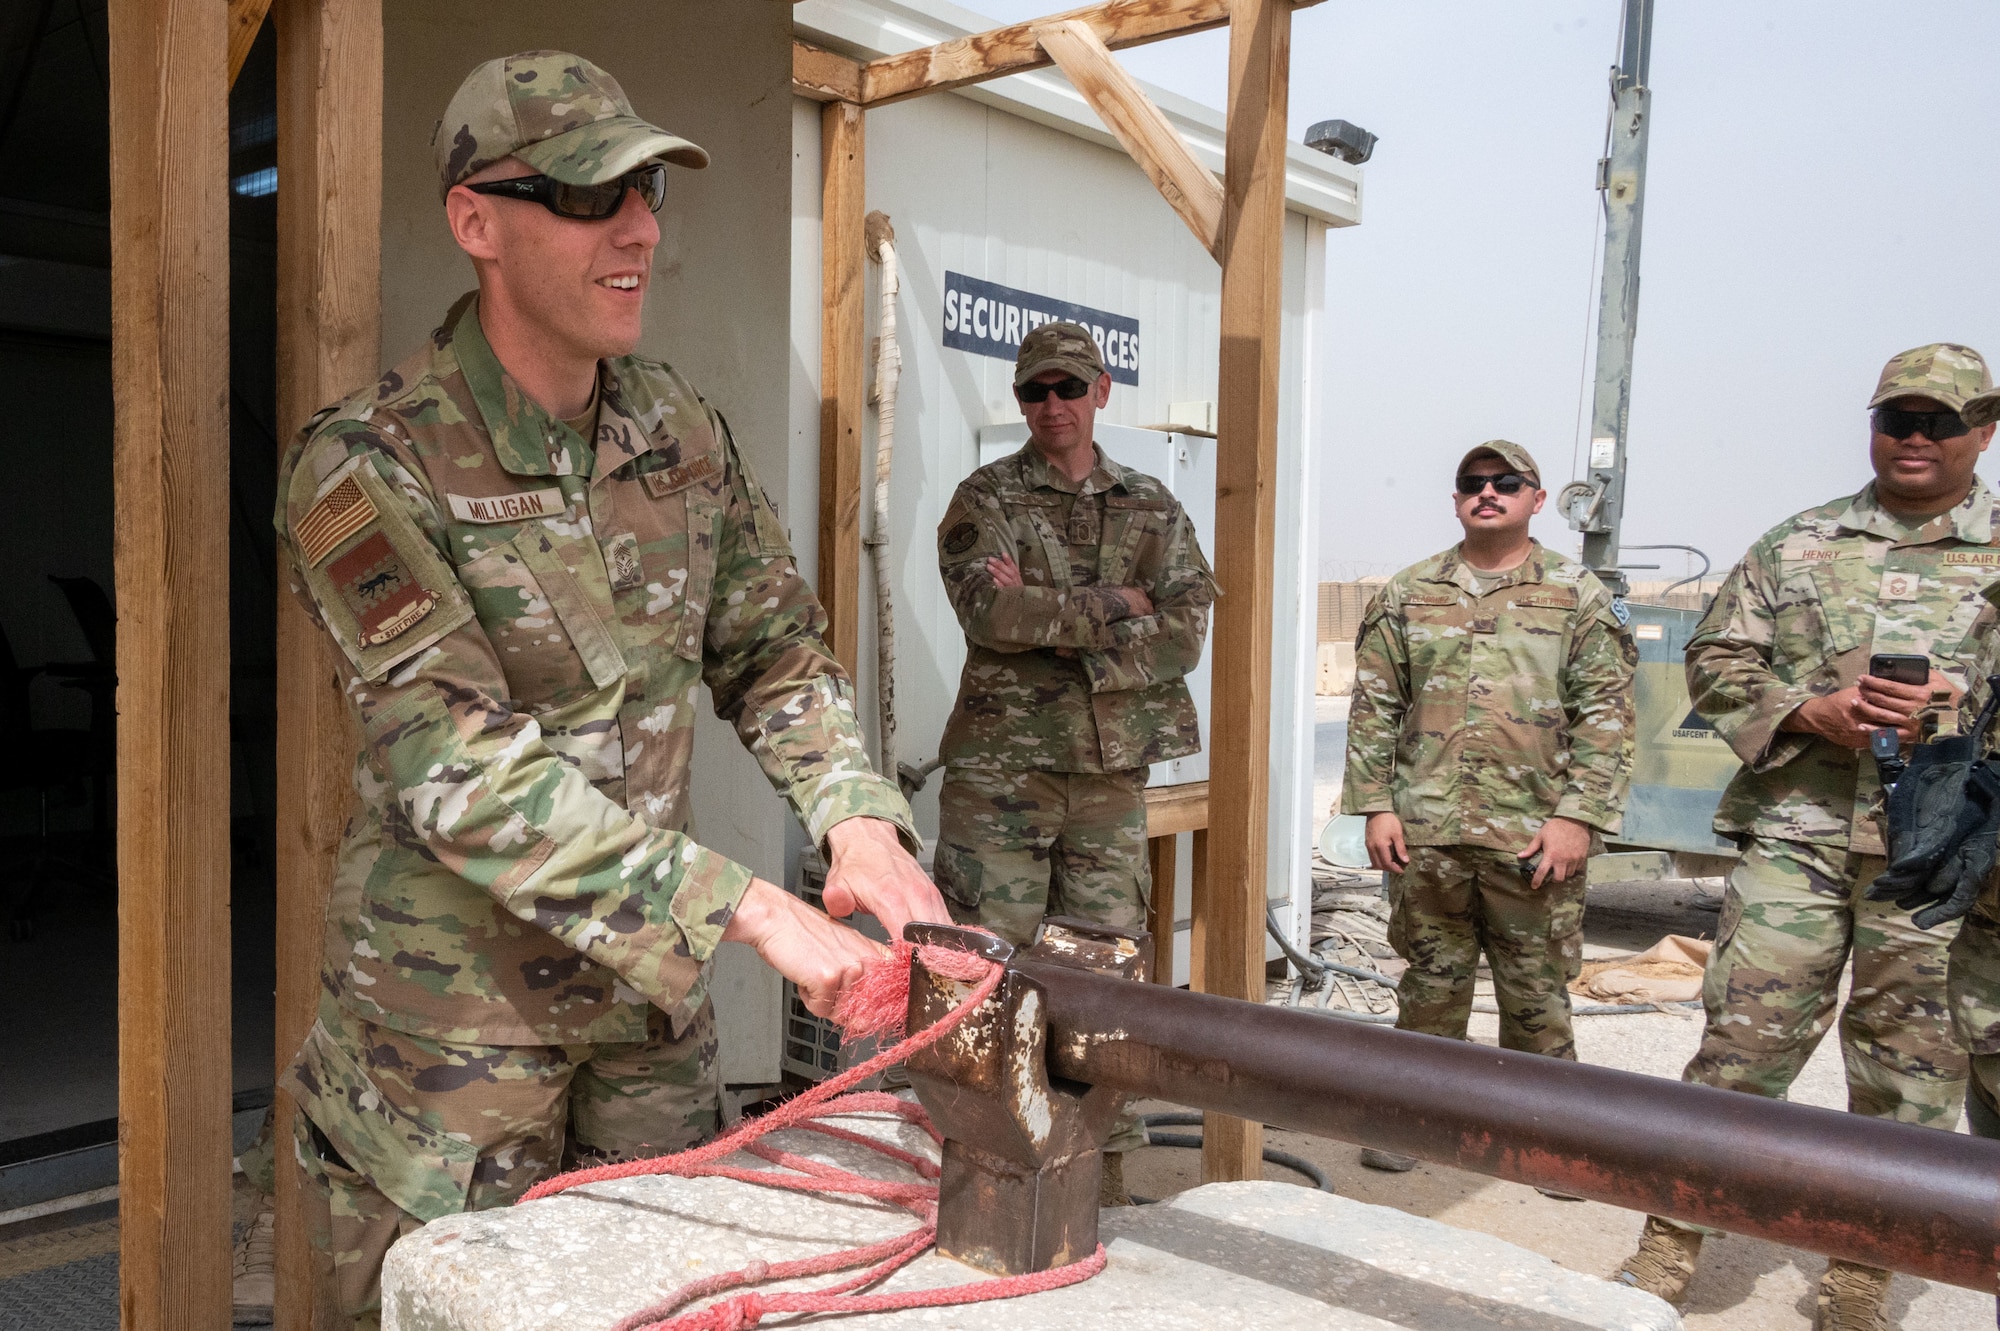 U.S. Air Force Chief Master Sgt. Sean M. Milligan, 332d Air Expeditionary Wing command chief, secures a controlled entry point gate while visiting 332nd Expeditionary Security Forces Squadron Airmen at an undisclosed location in Southwest Asia, April 23, 2022. Chief Milligan's immersion visits give him a better understanding of the unique skillsets every Airman brings to the 332d AEW Red Tail team. (U.S. Air Force photo by Tech. Sgt. Lauren M. Snyder)